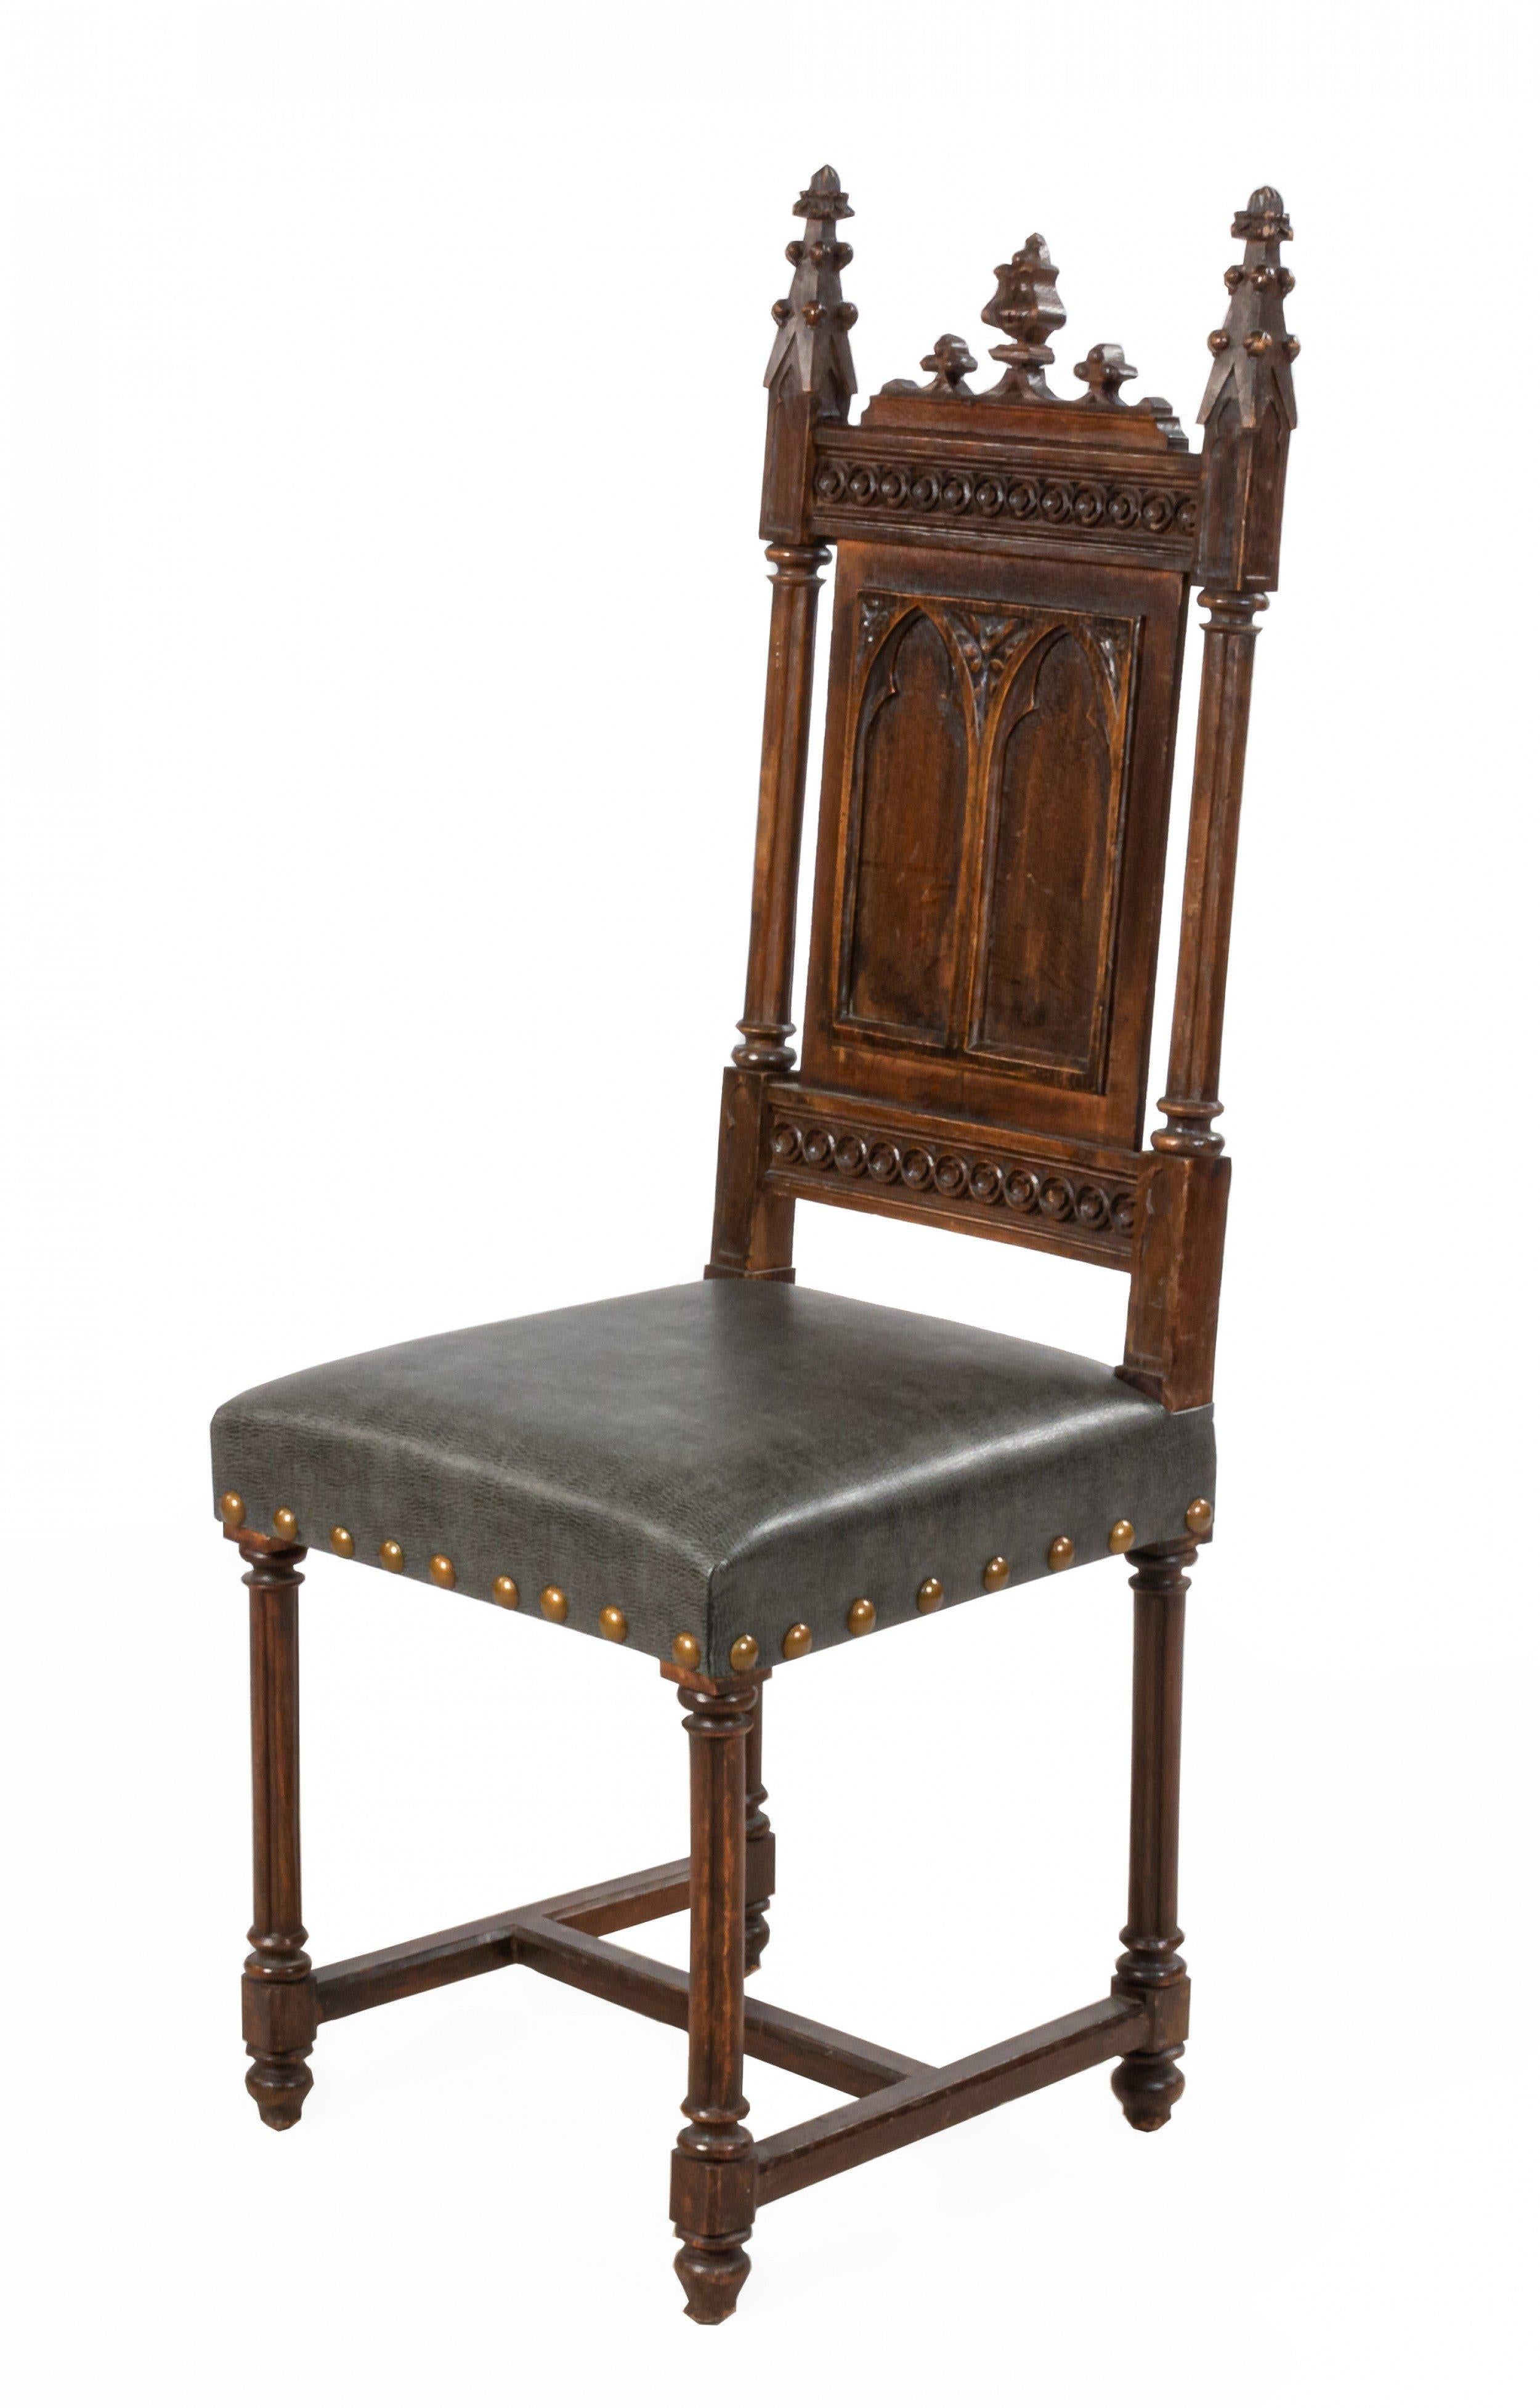 Set of 11 English Gothic Revival style (19th Century) oak side panel back side chairs with finials and gray leather seats.